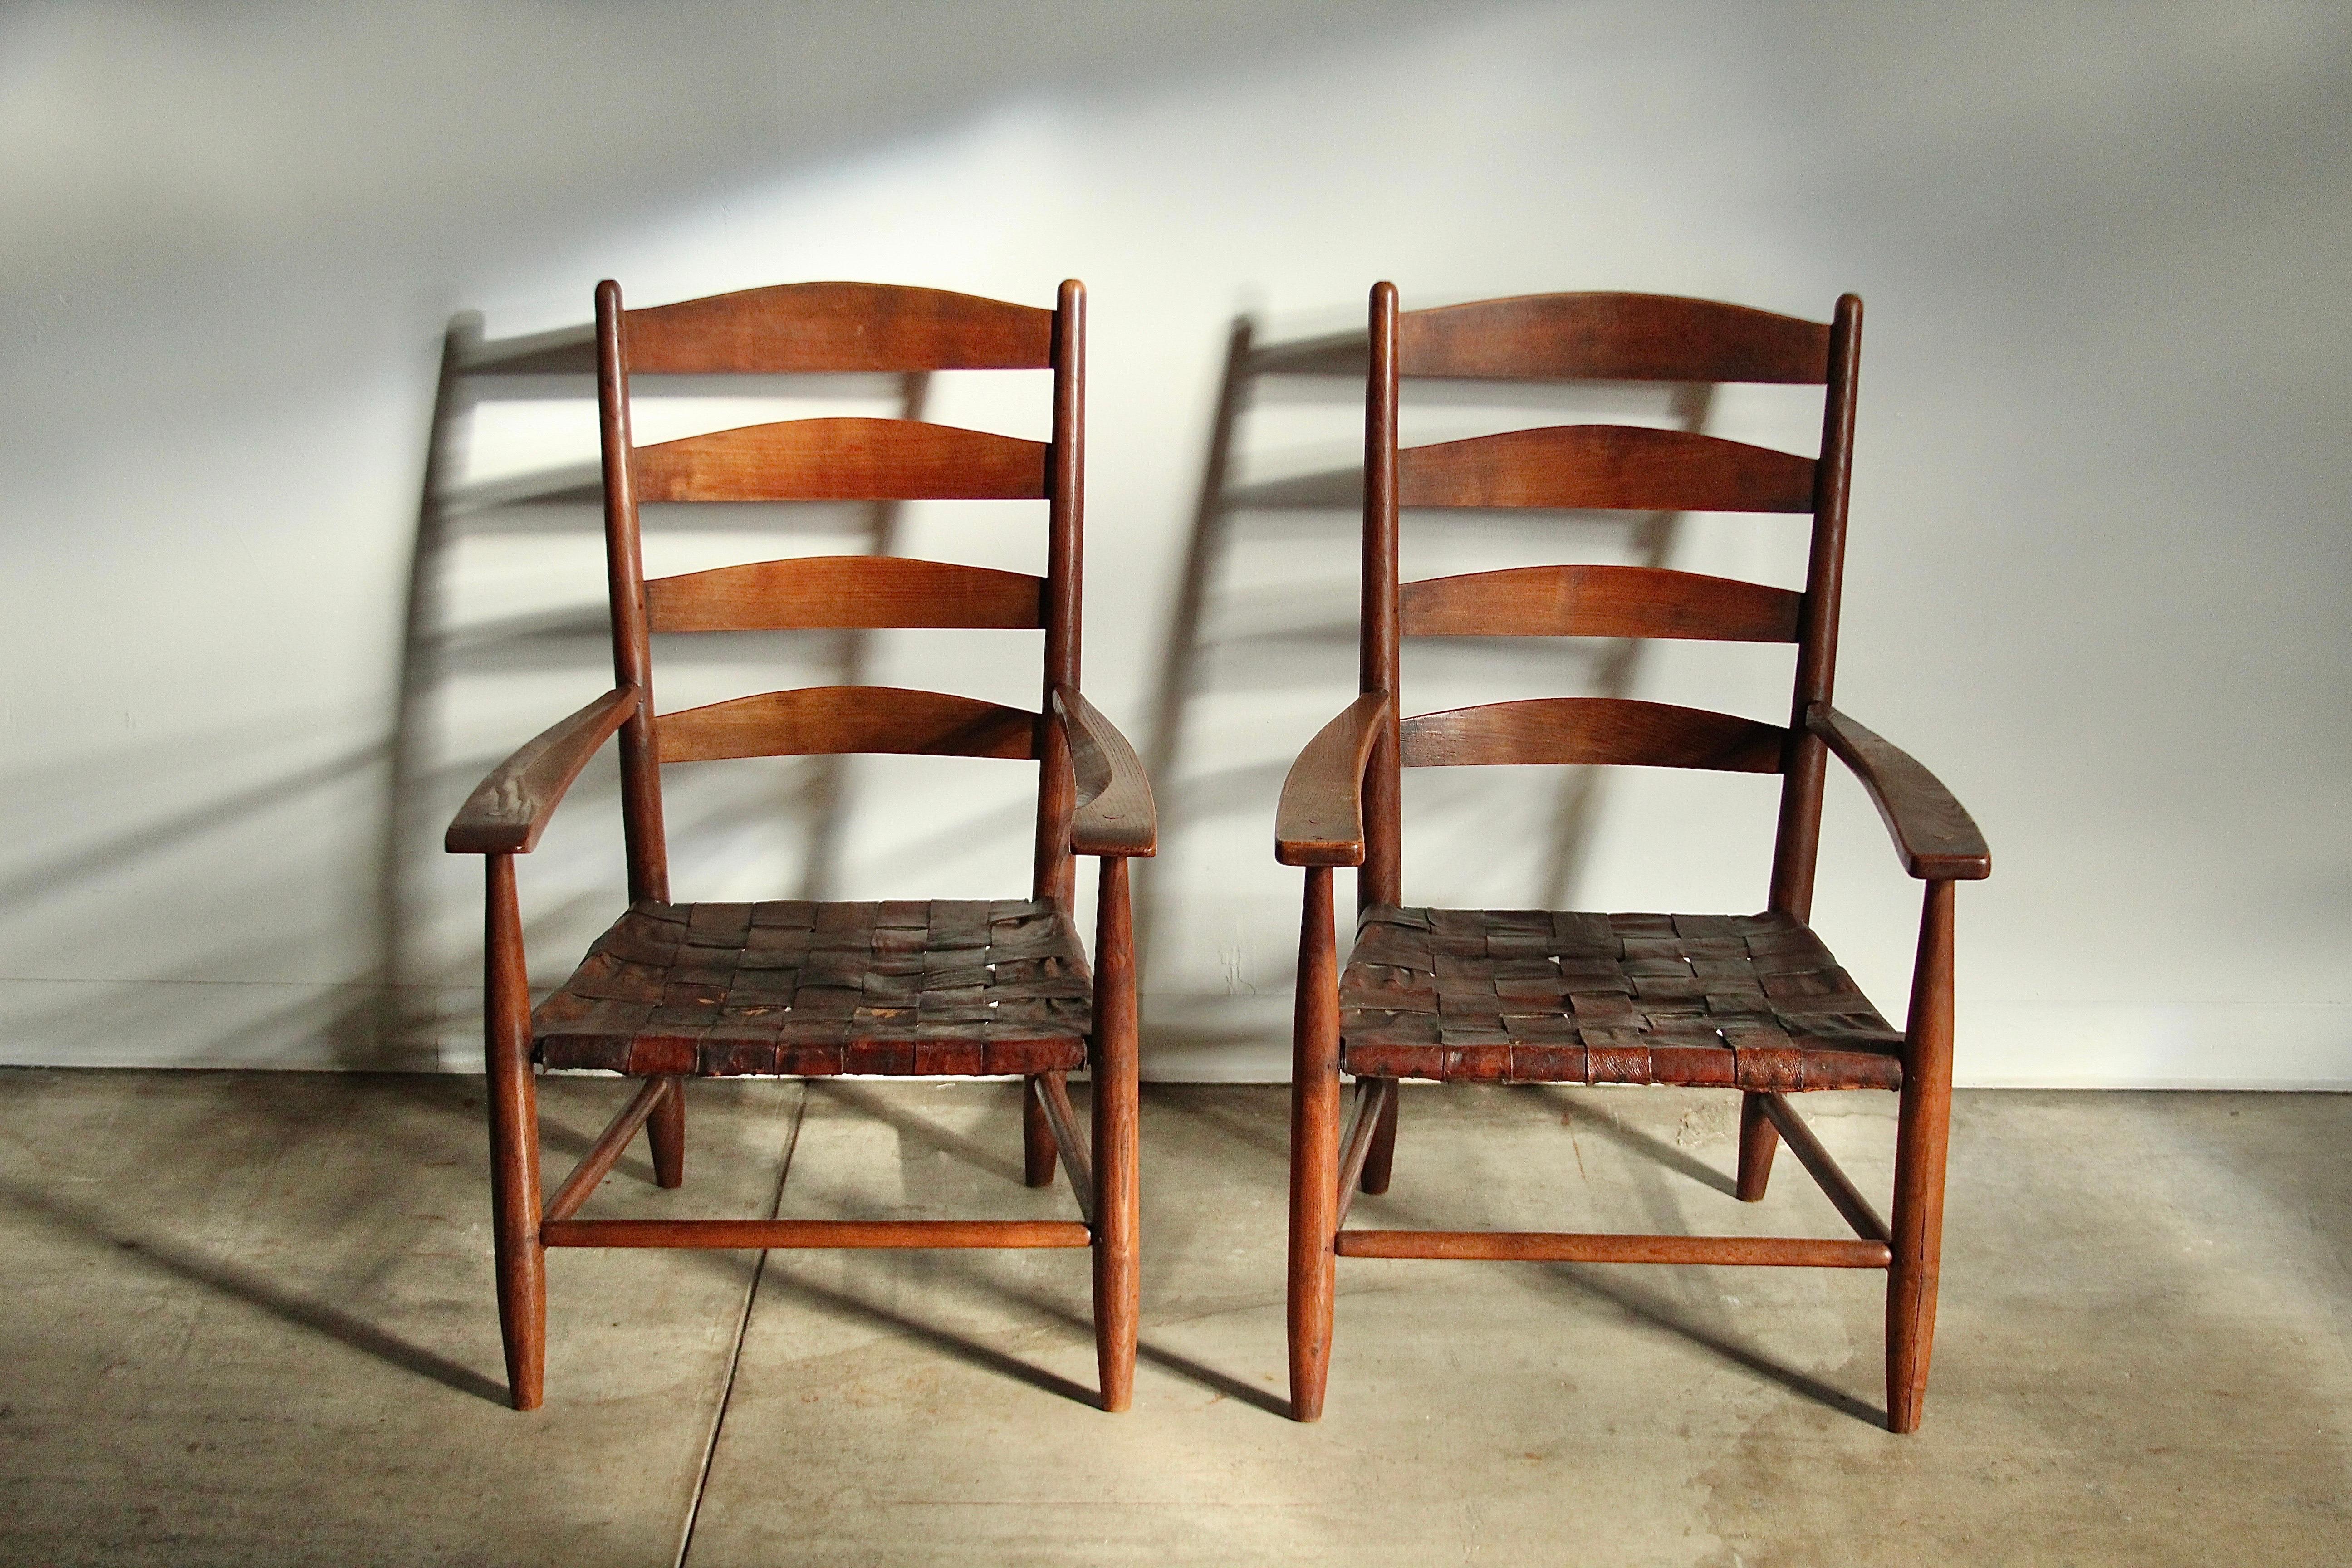 A true pair of artifacts! This pair of large Shaker style, loungey, arm chairs was designed and built by Gordon Russell around 1904 in Broadway, England. The chairs feature incredible, hand built, peg construction, and are crafted with the highest